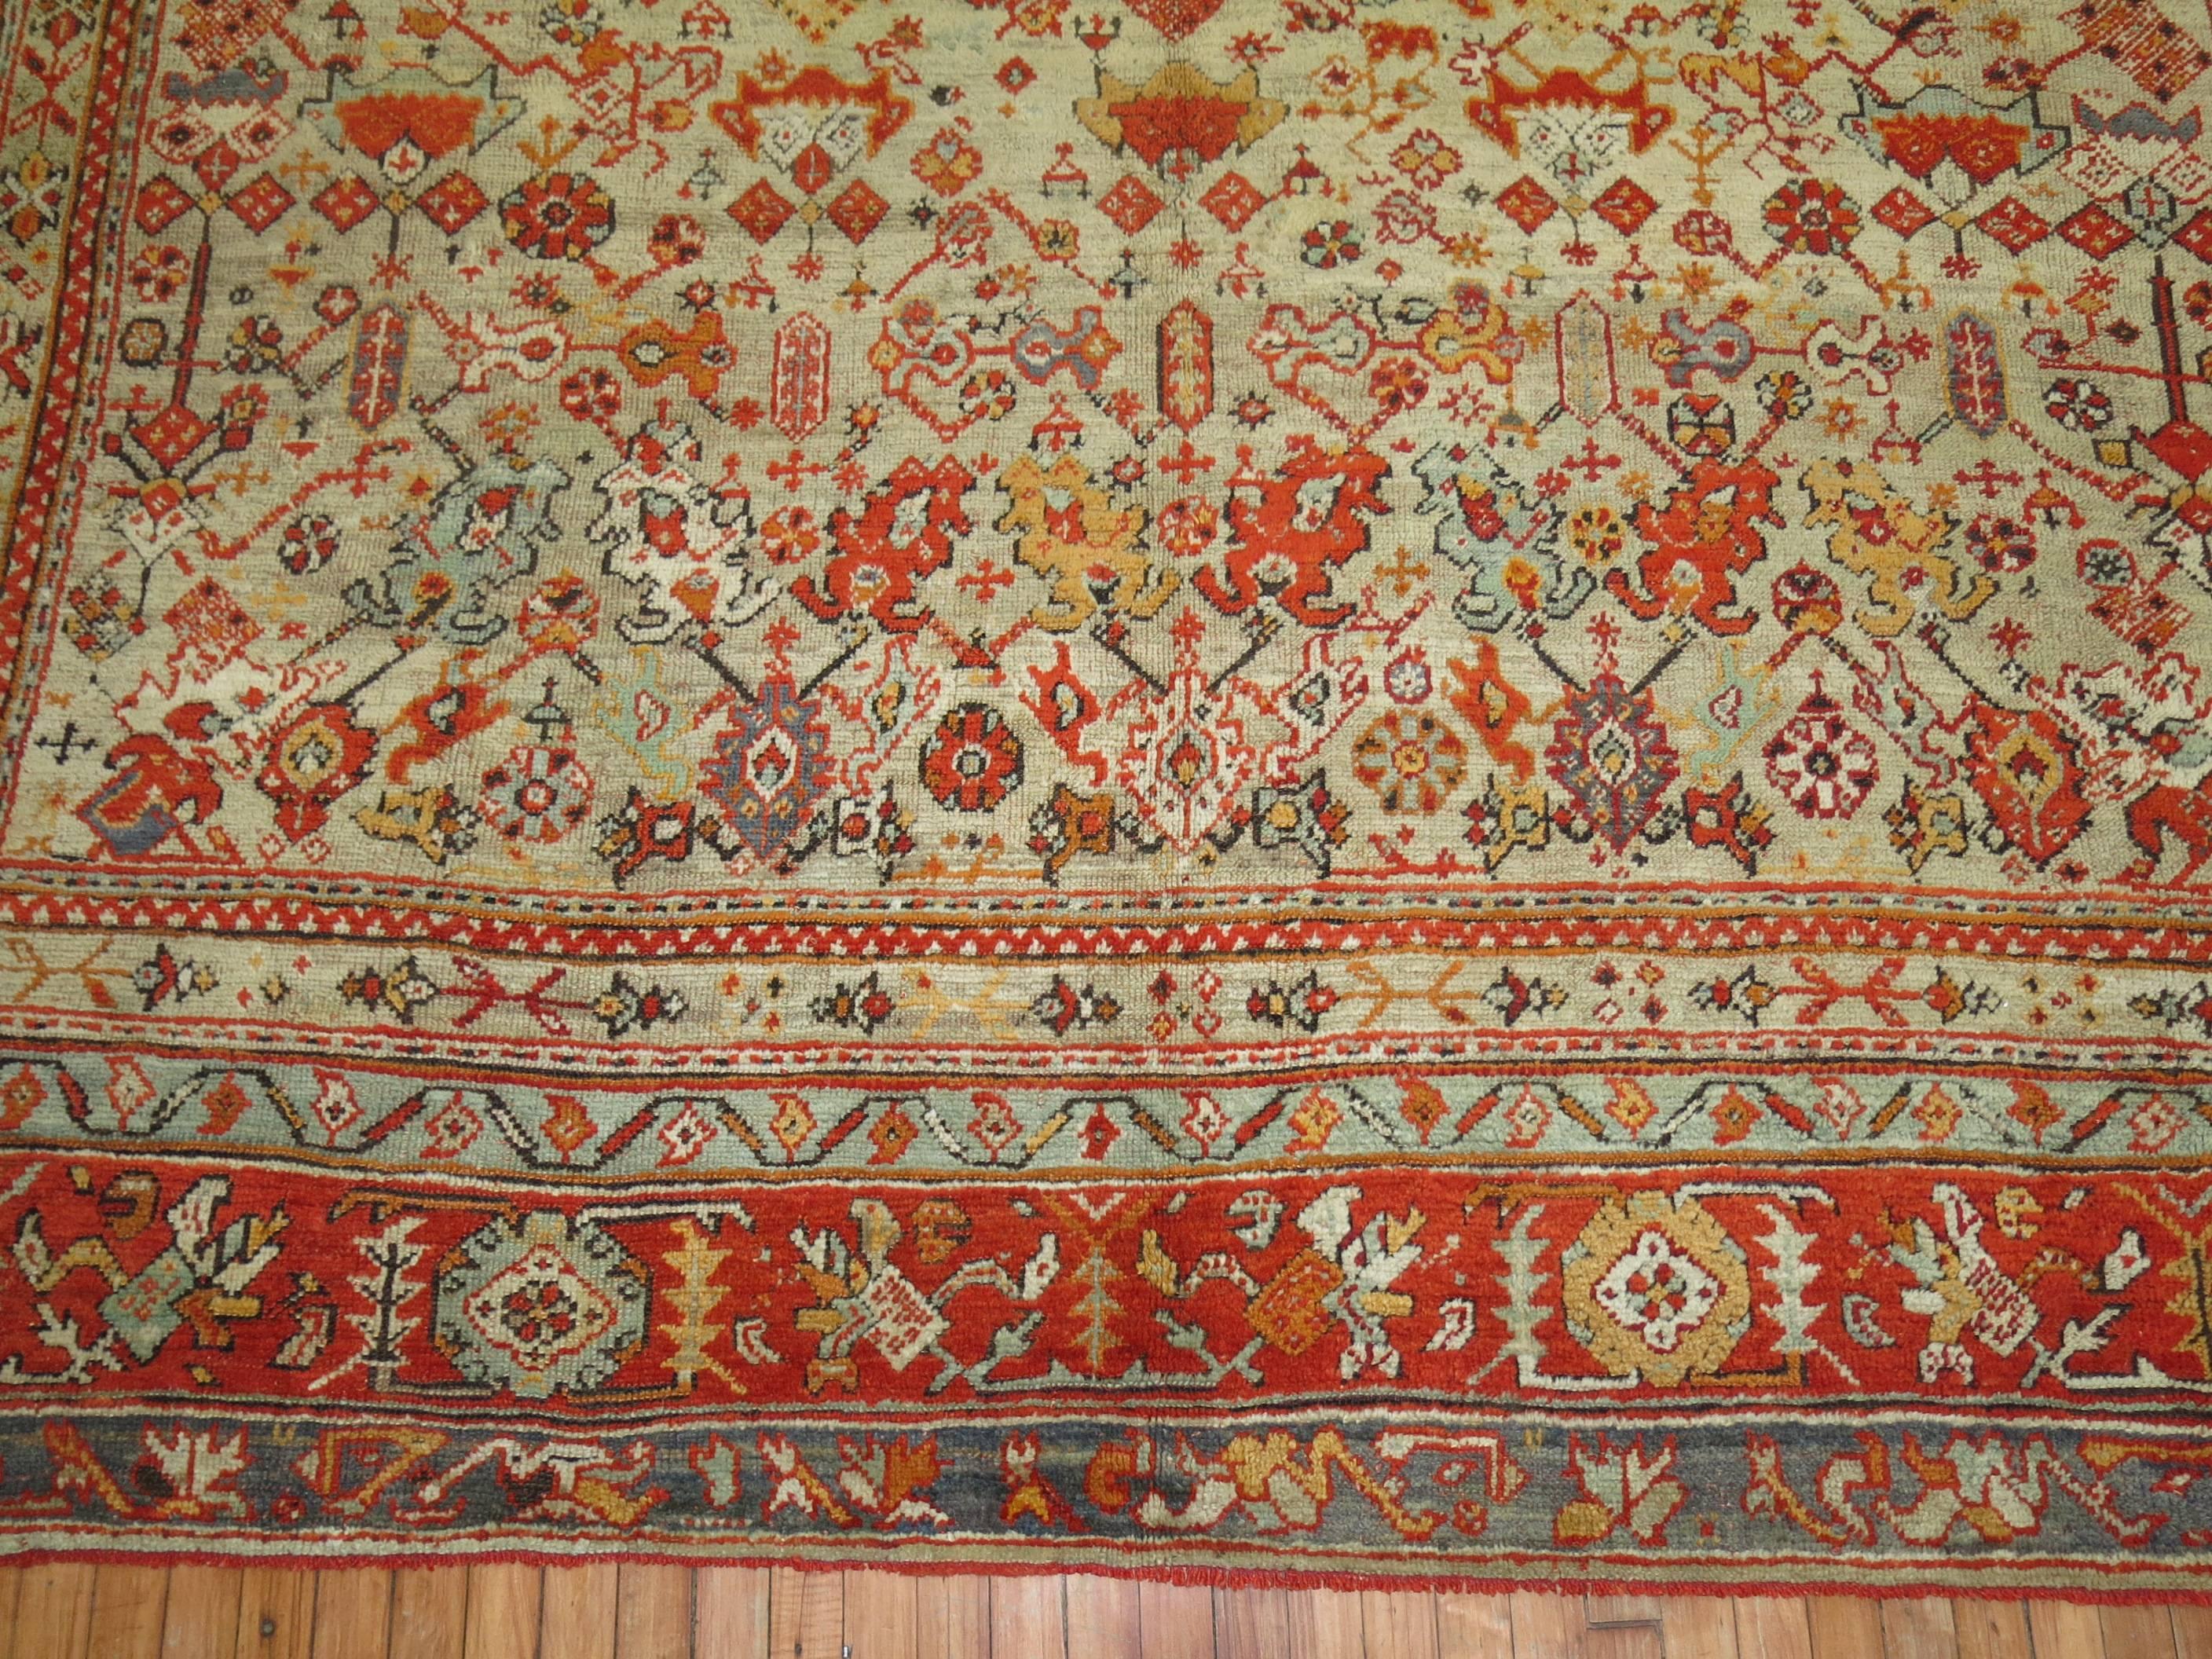 An early 20th century square size antique Turkish Oushak featuring an-all over design in warm colors.

11' x 11'8''